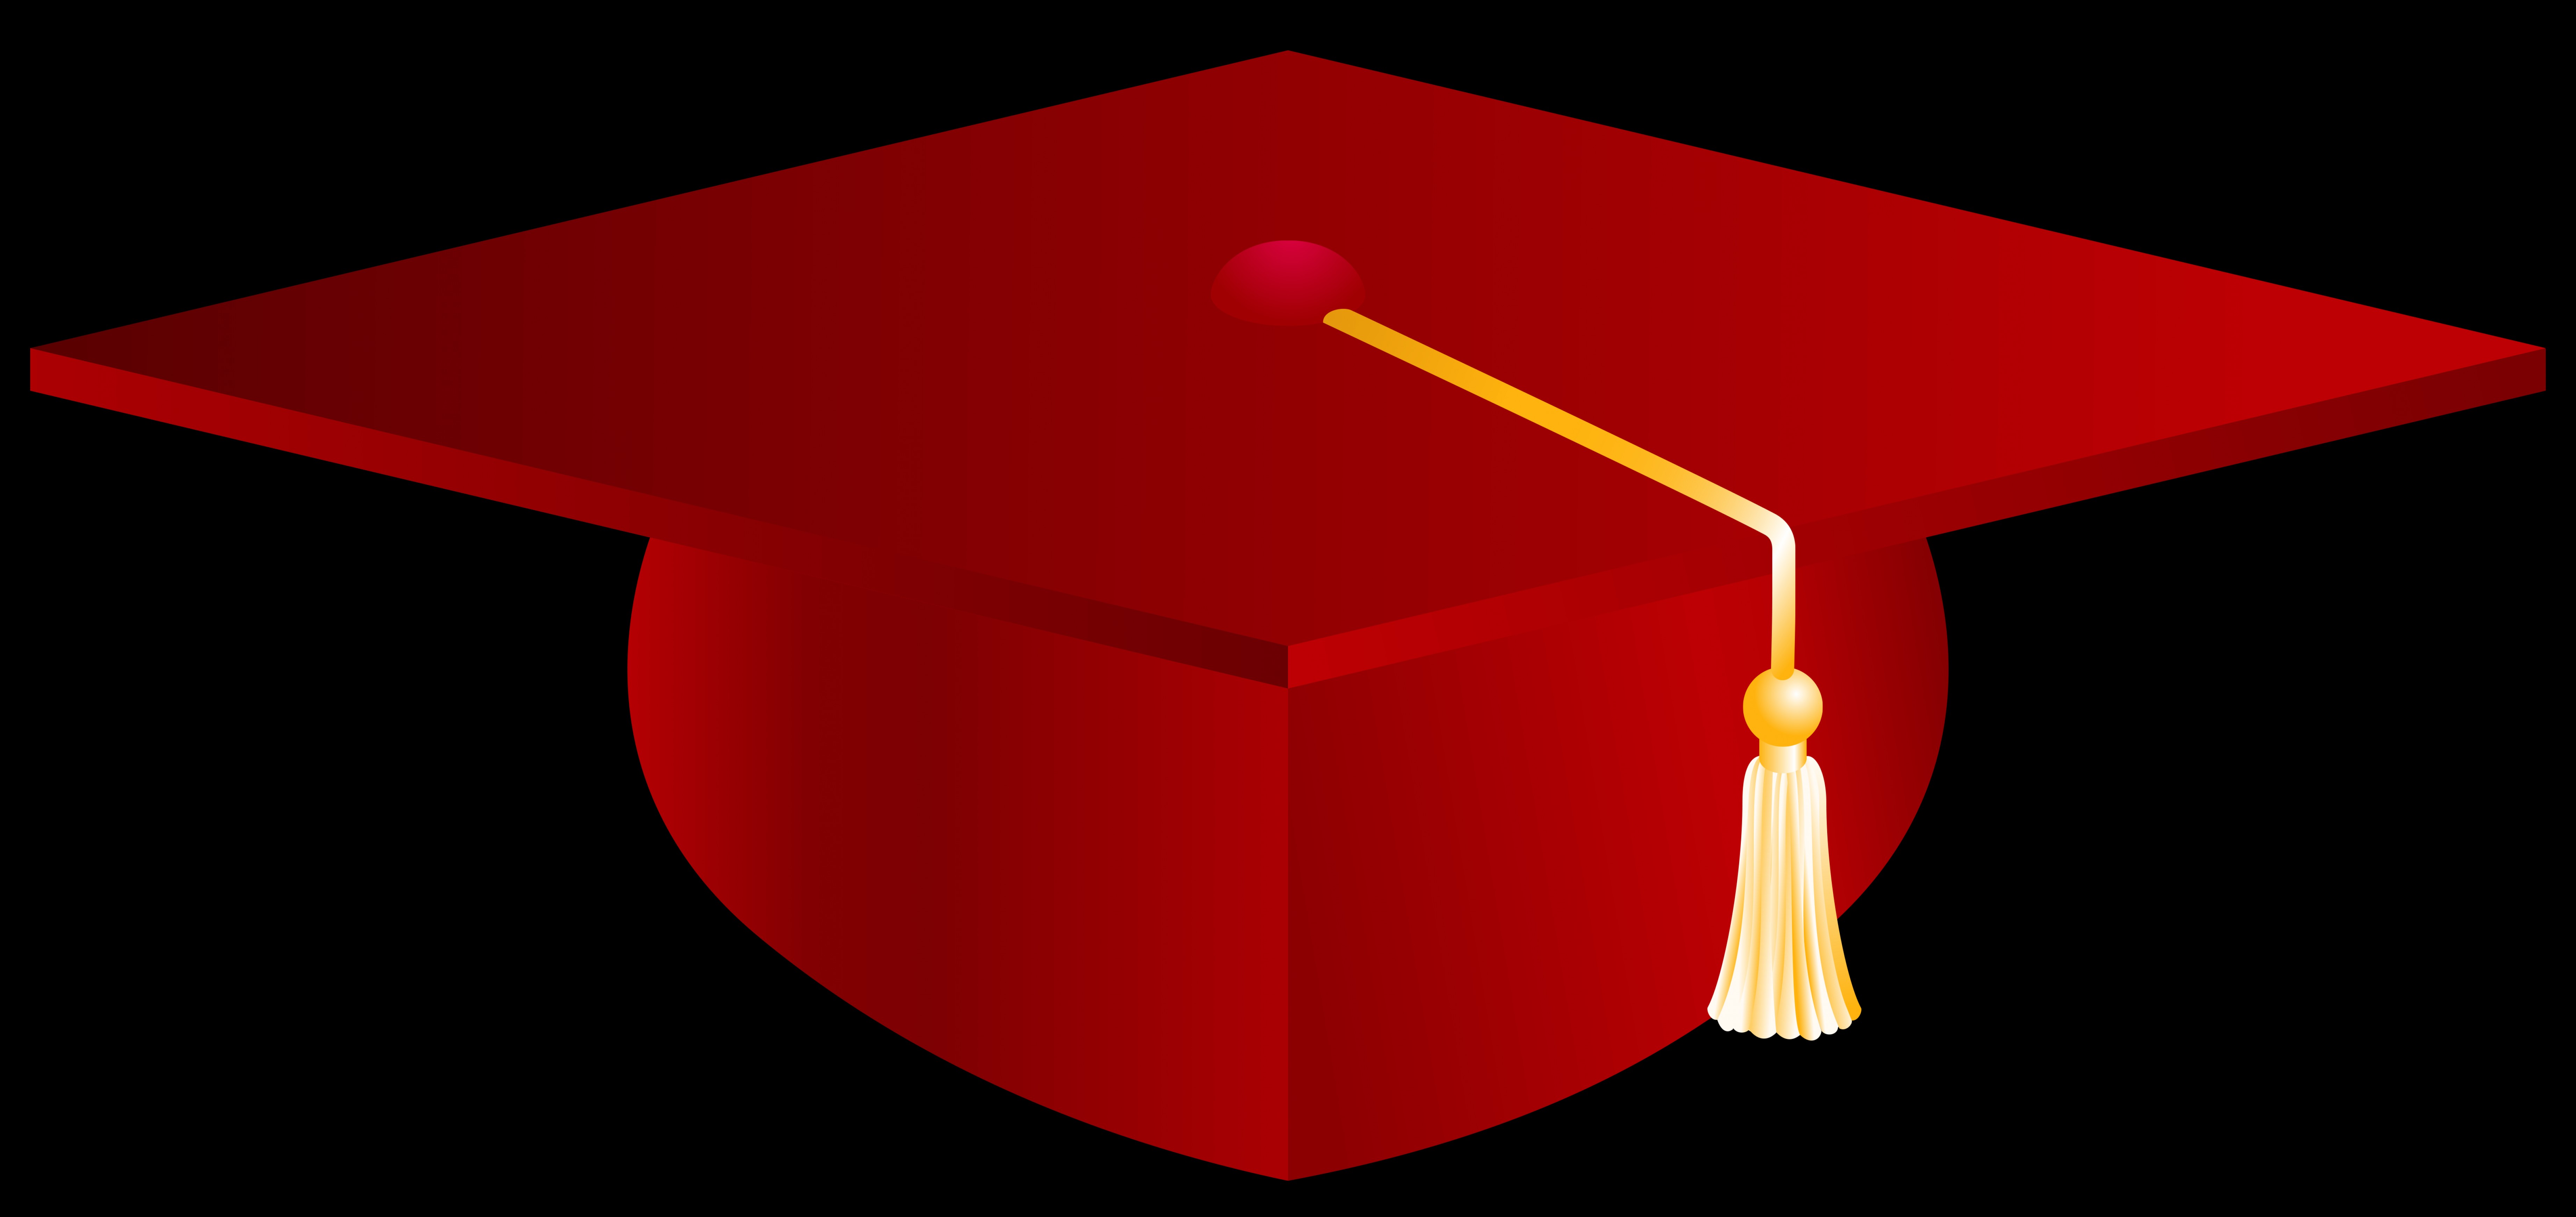 Red Graduation Cap And Diploma Clip Art All In One Photos